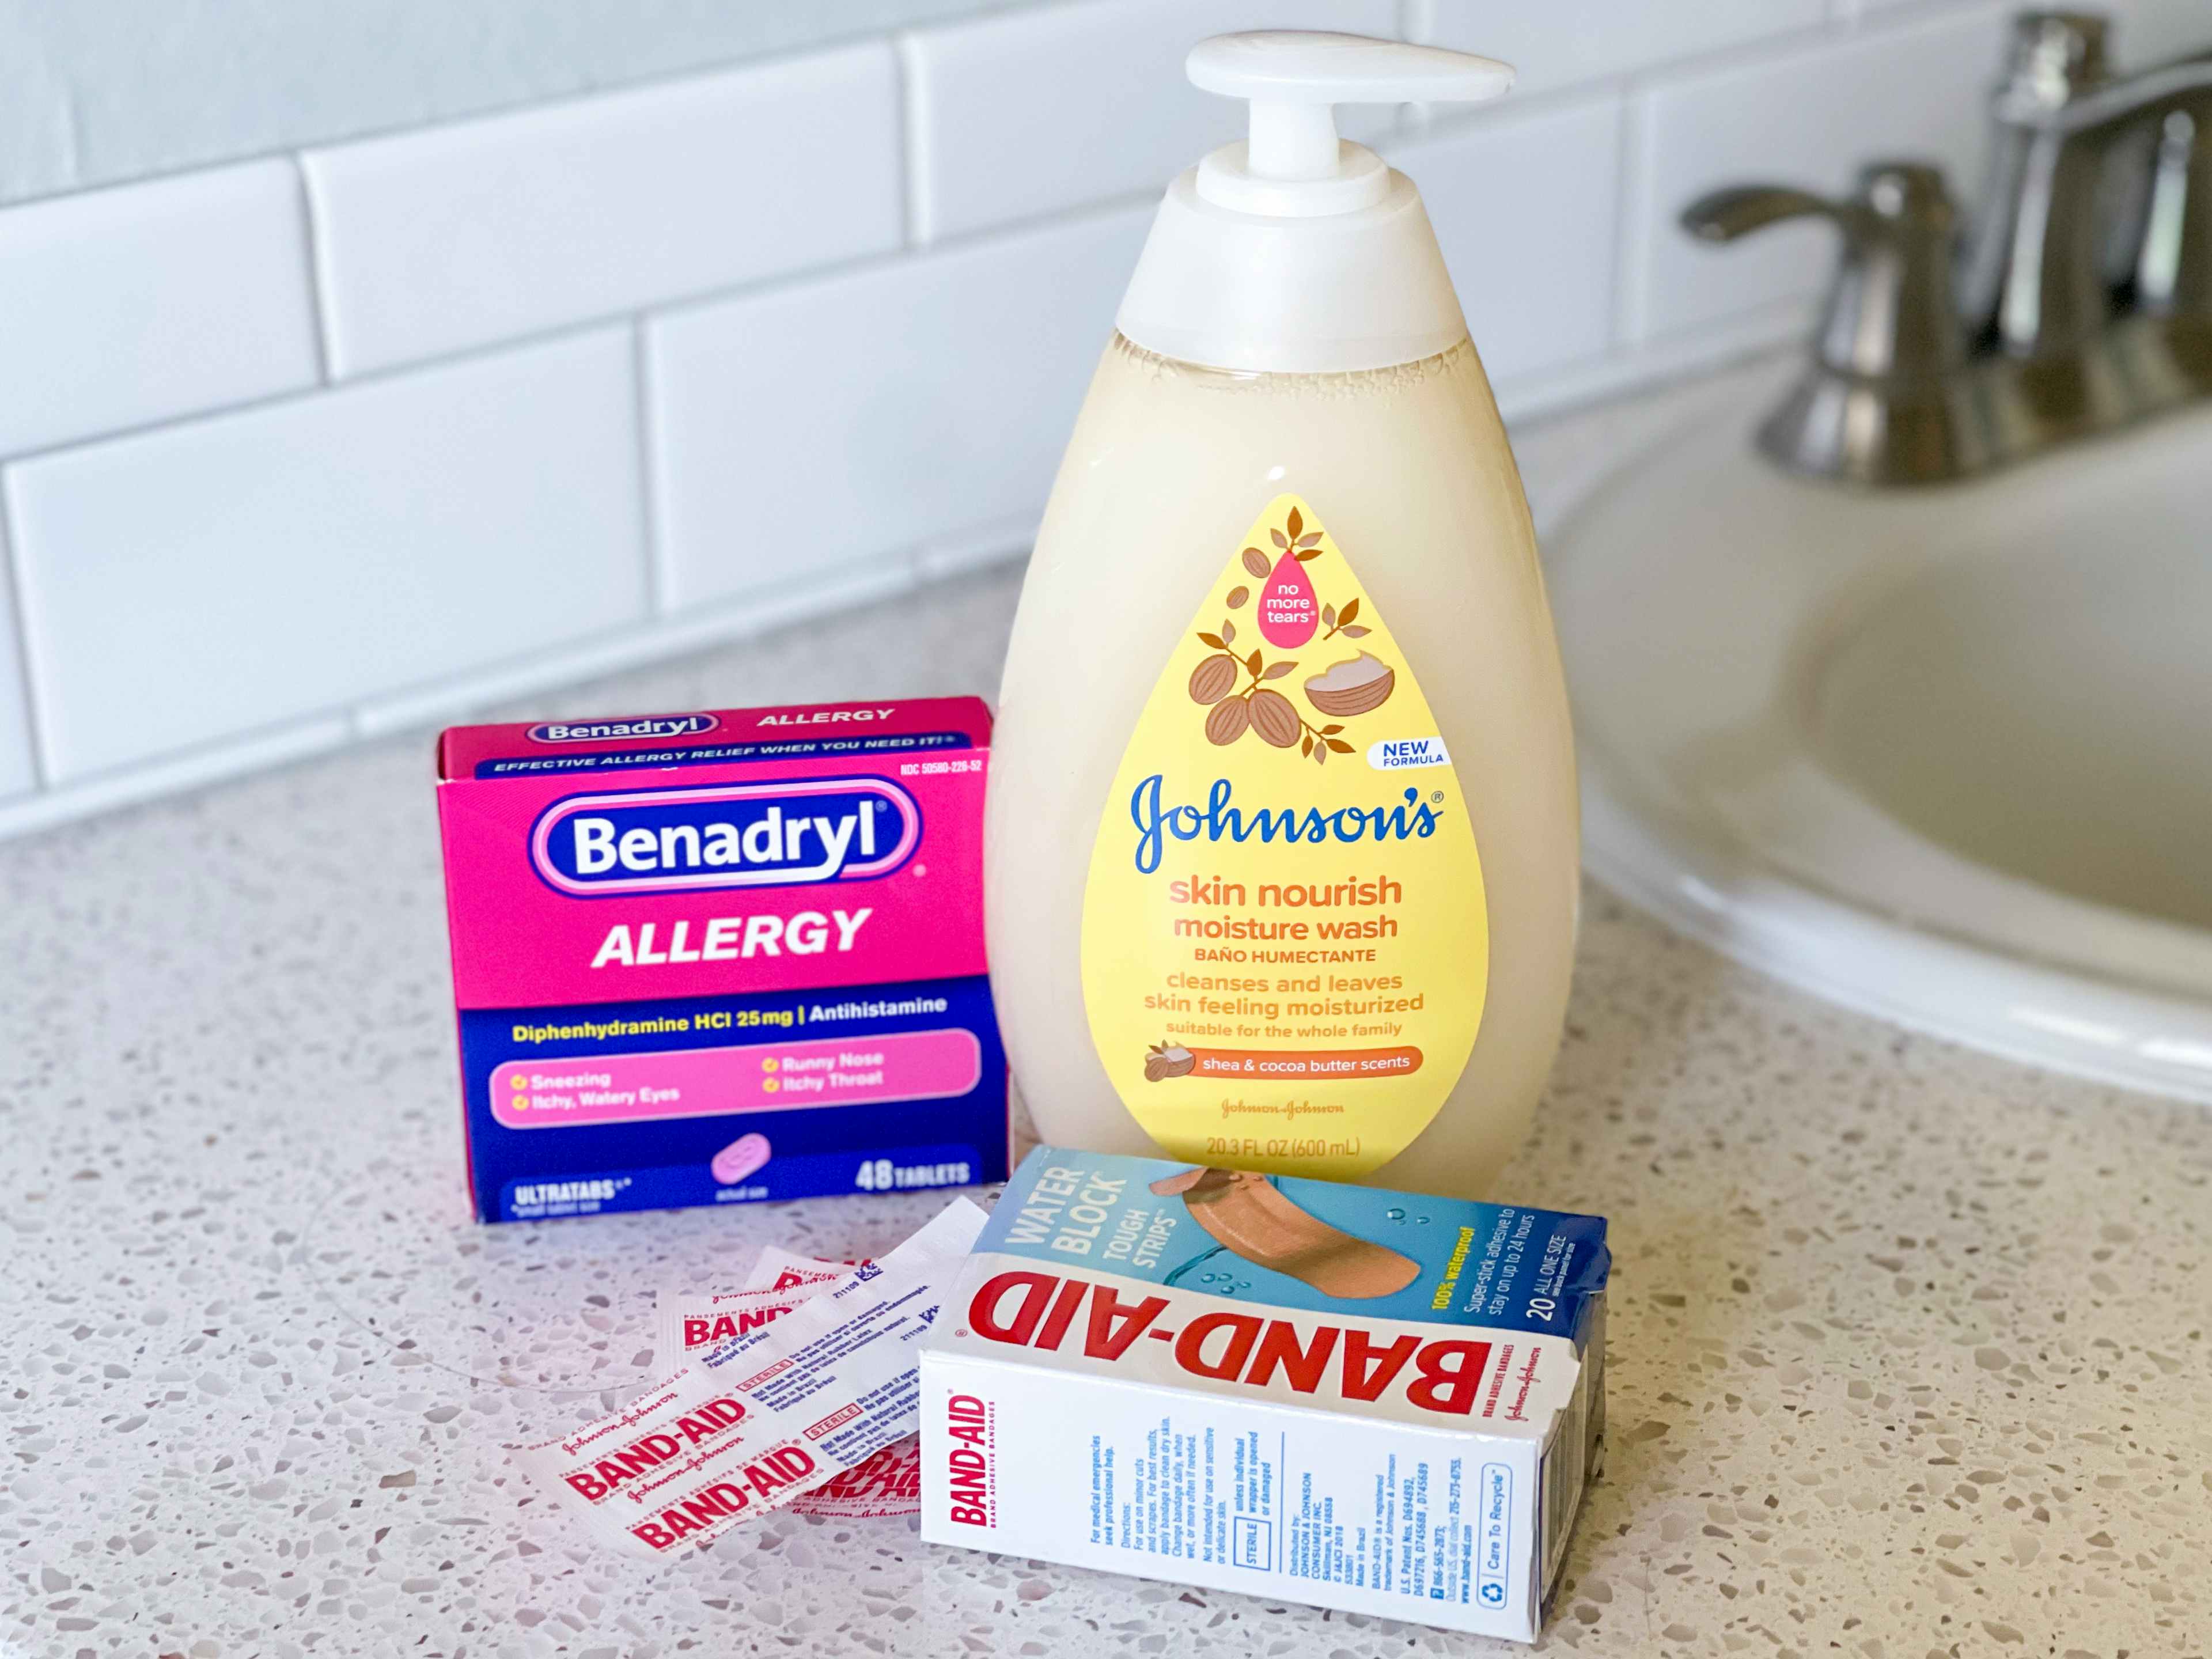 A box of Benedryl, a bottle of Johnson's no tear body wash, and an open pack of Band-Aids sitting on a bathroom counter.